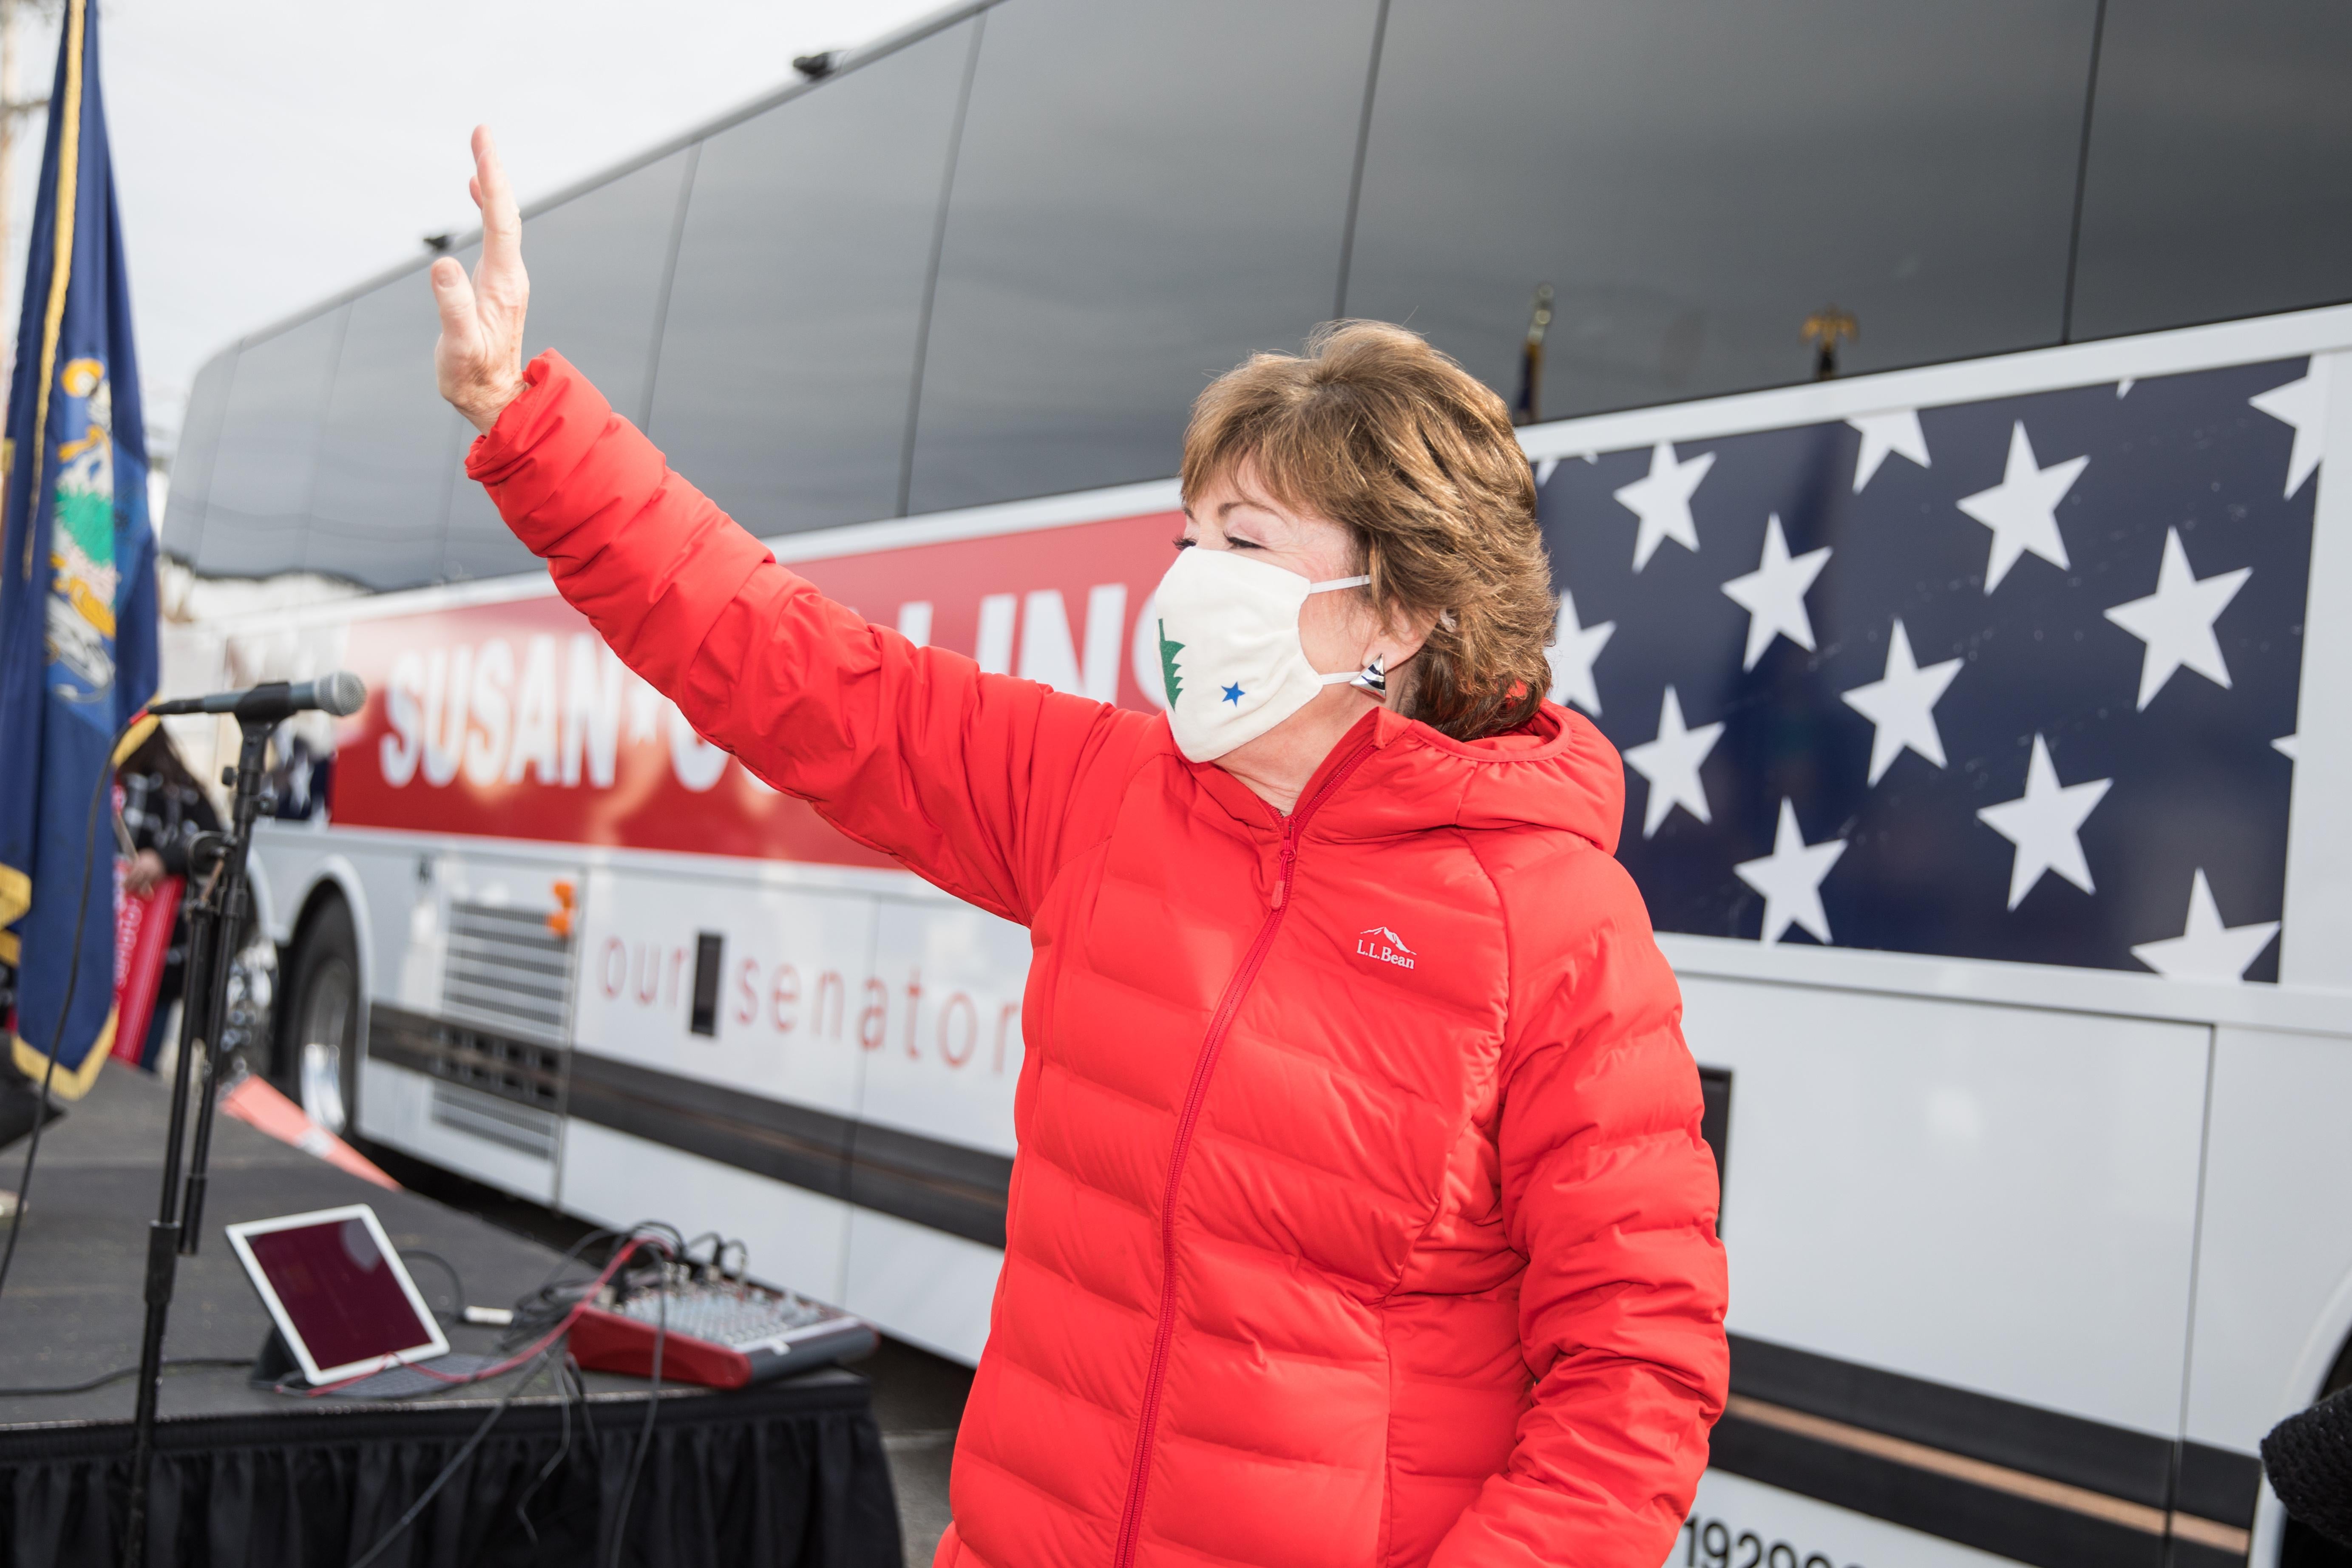 Susan Collins stands in front of her campaign bus, waving to supporters